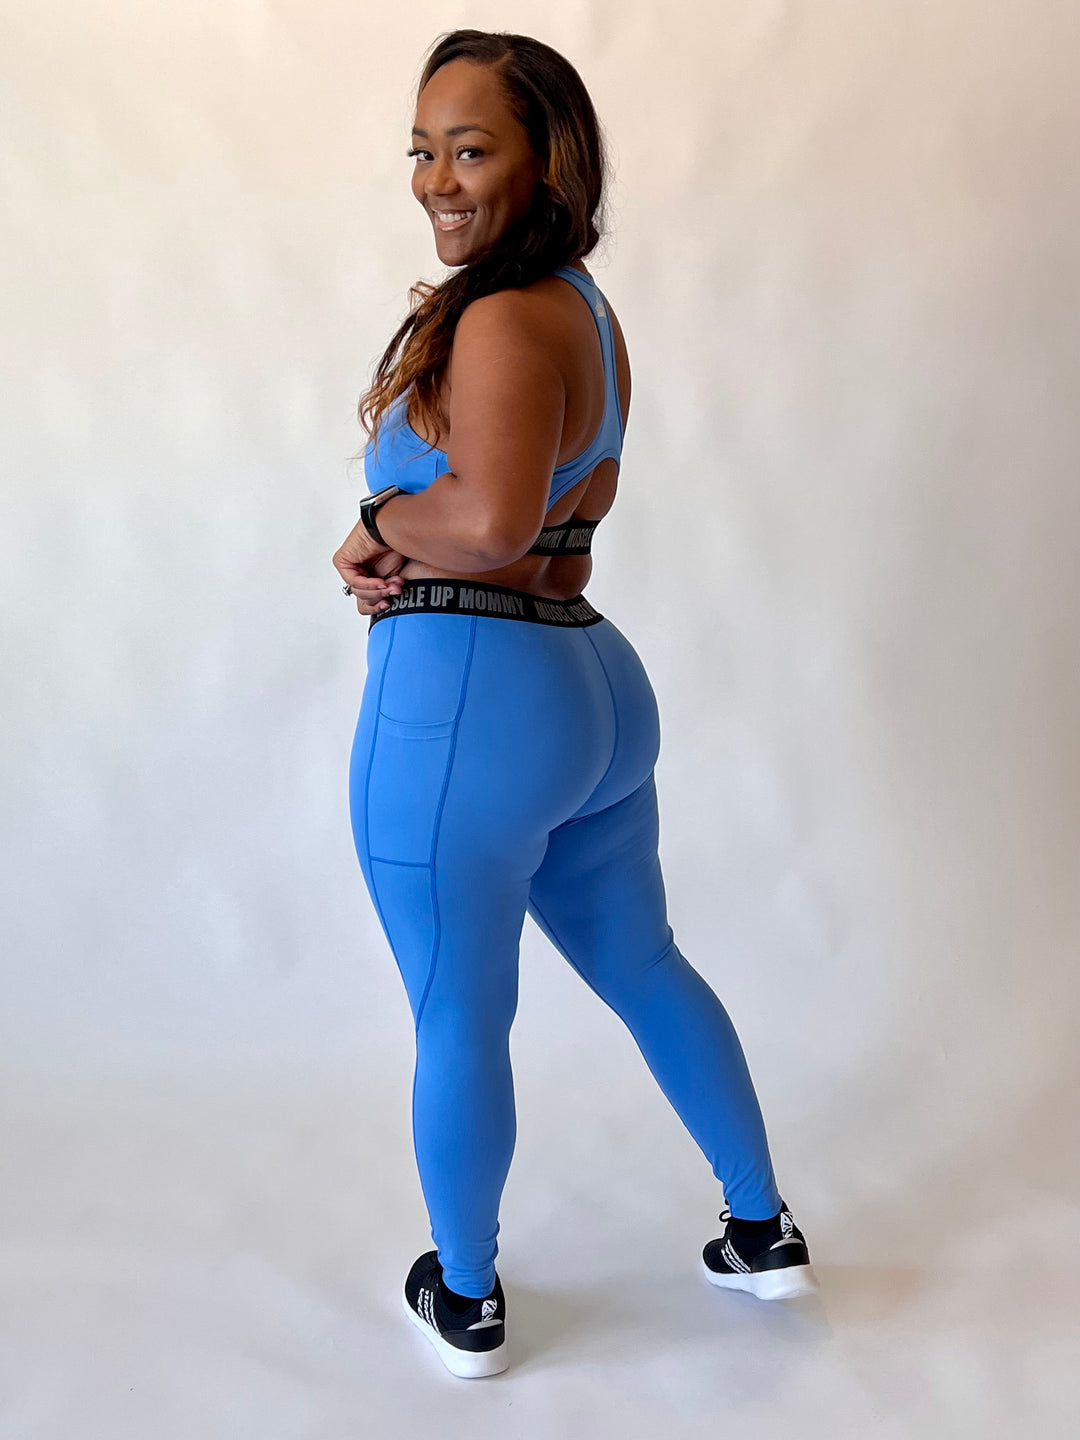 Check Out This Hot Curvy Nigerian Mom In Leggings And Tight Jeans (photos)  - Romance - Nigeria